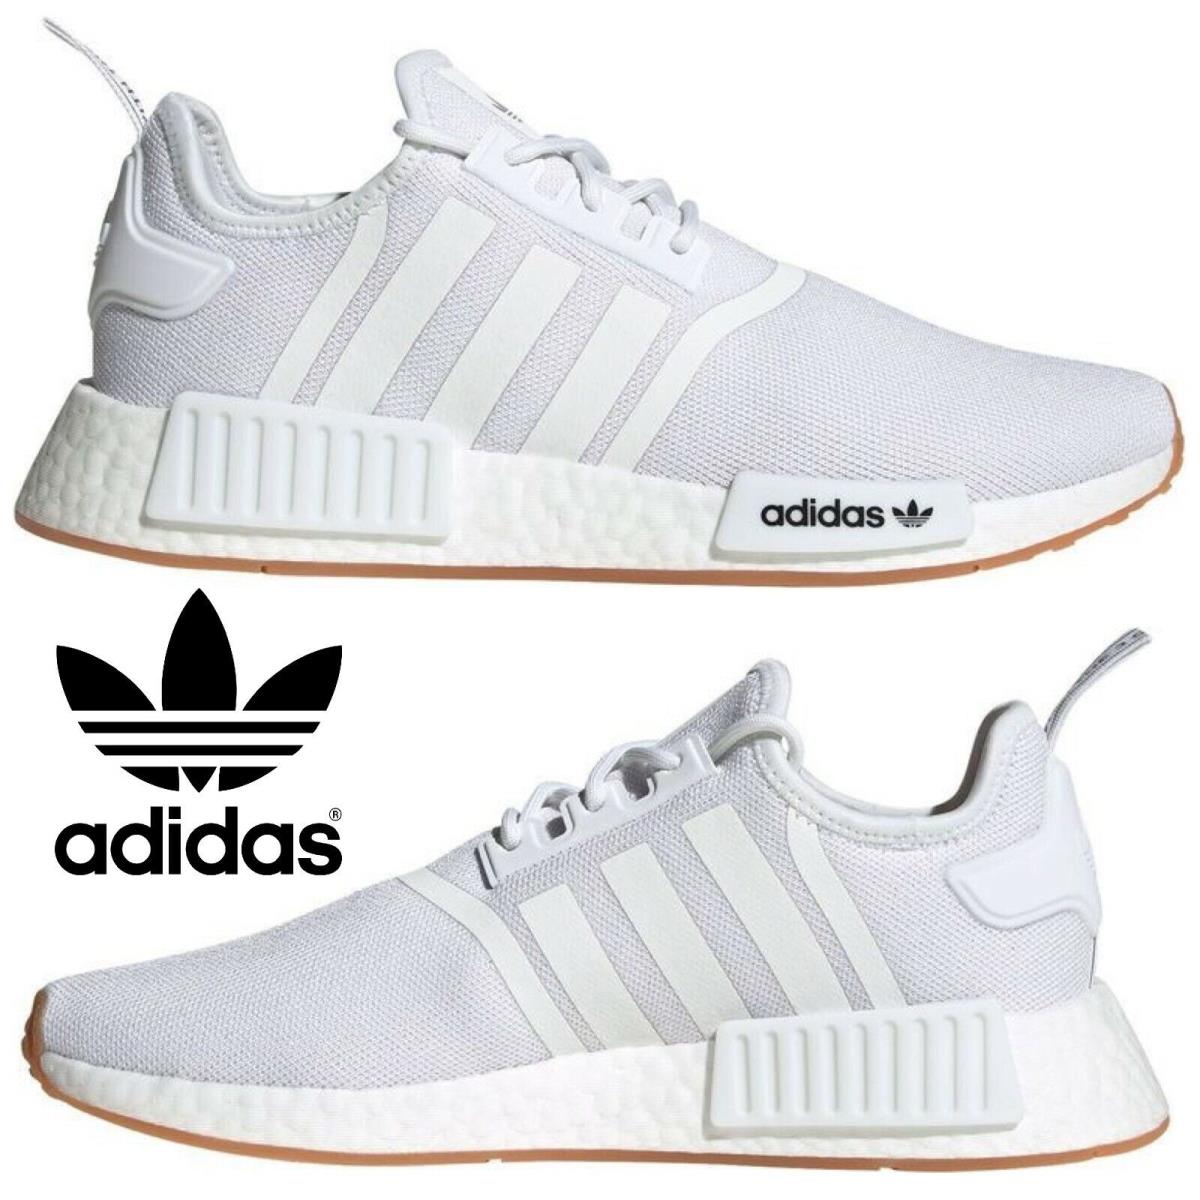 Adidas Originals Nmd R1 Men`s Sneakers Running Shoes Gym Casual Sport White - White , WHITE/GUM/BLACK Manufacturer